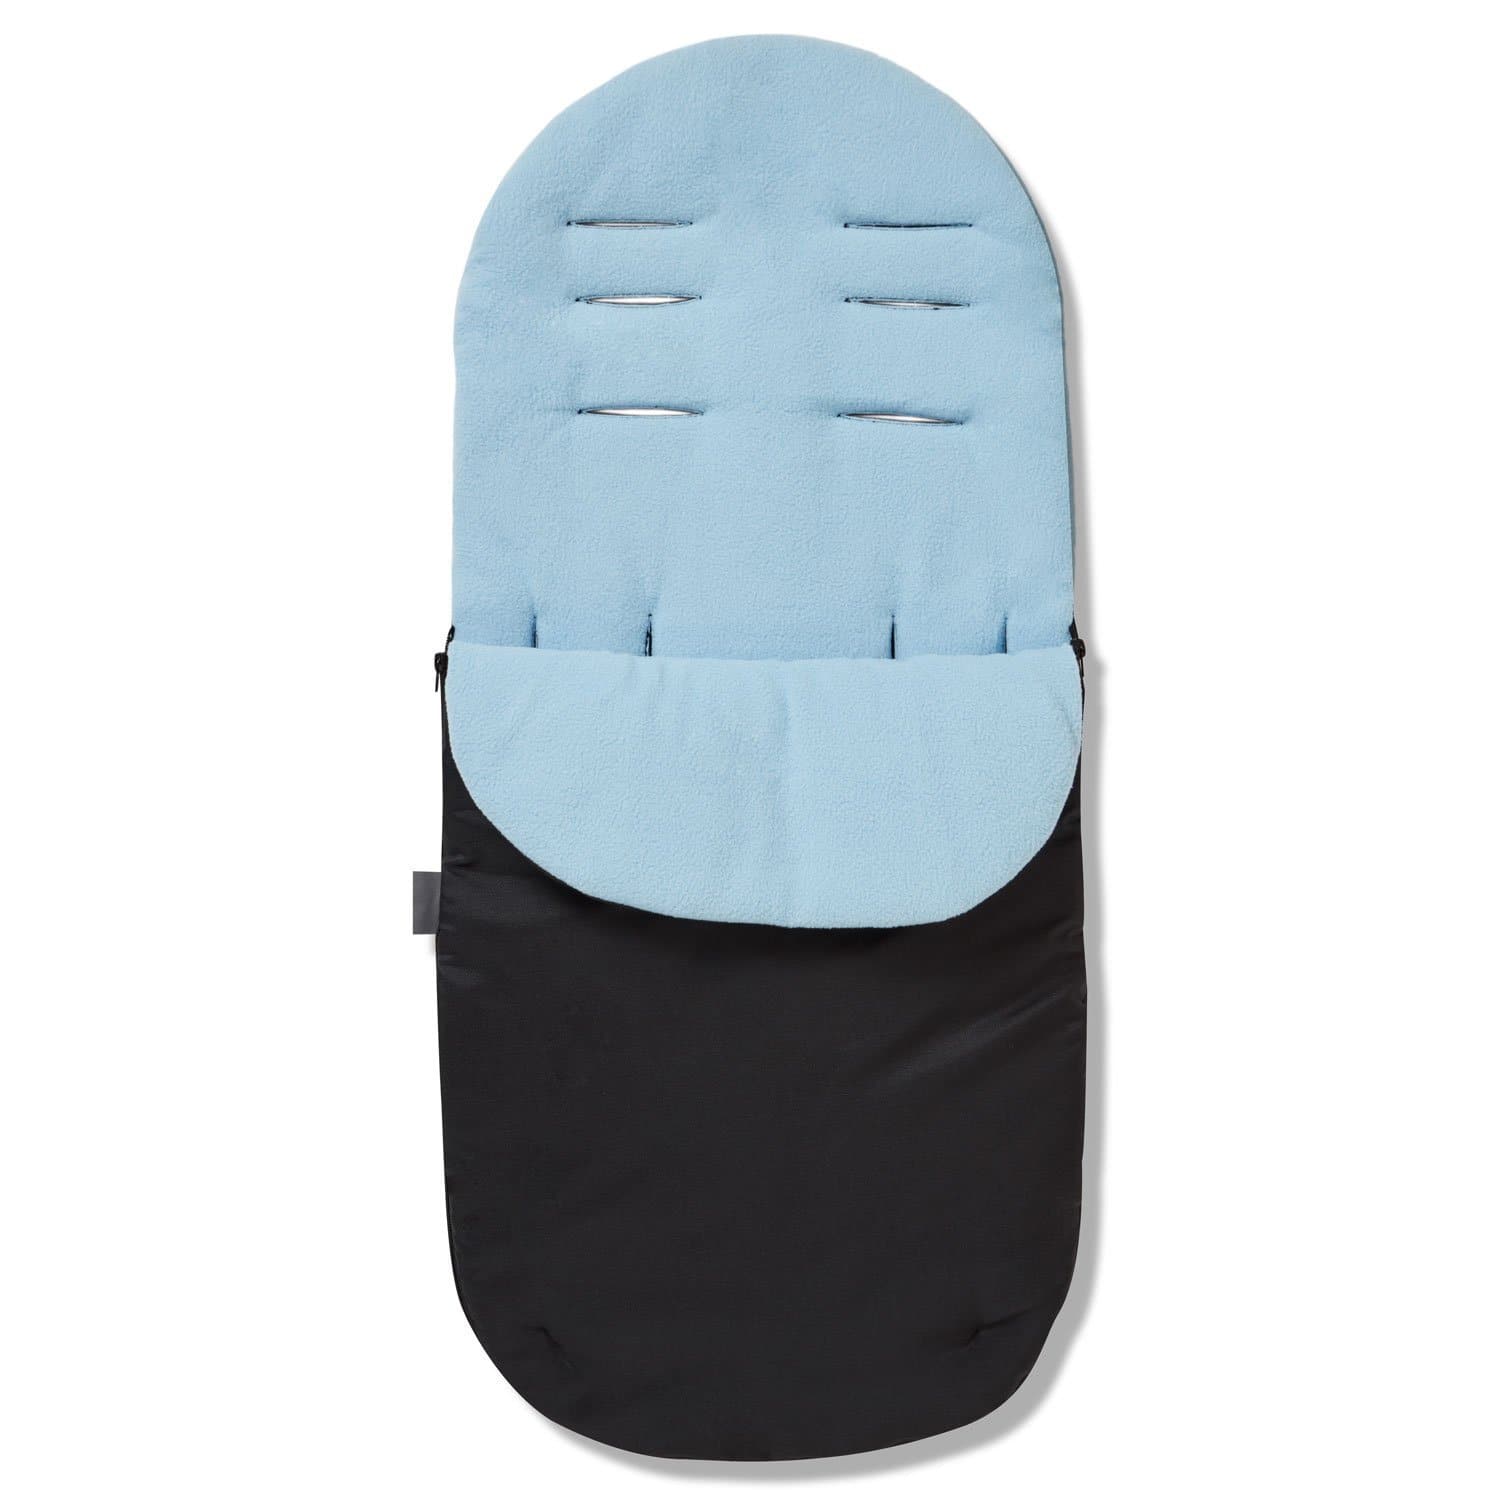 Footmuff / Cosy Toes Compatible with My Babiie - Light Blue / Fits All Models | For Your Little One